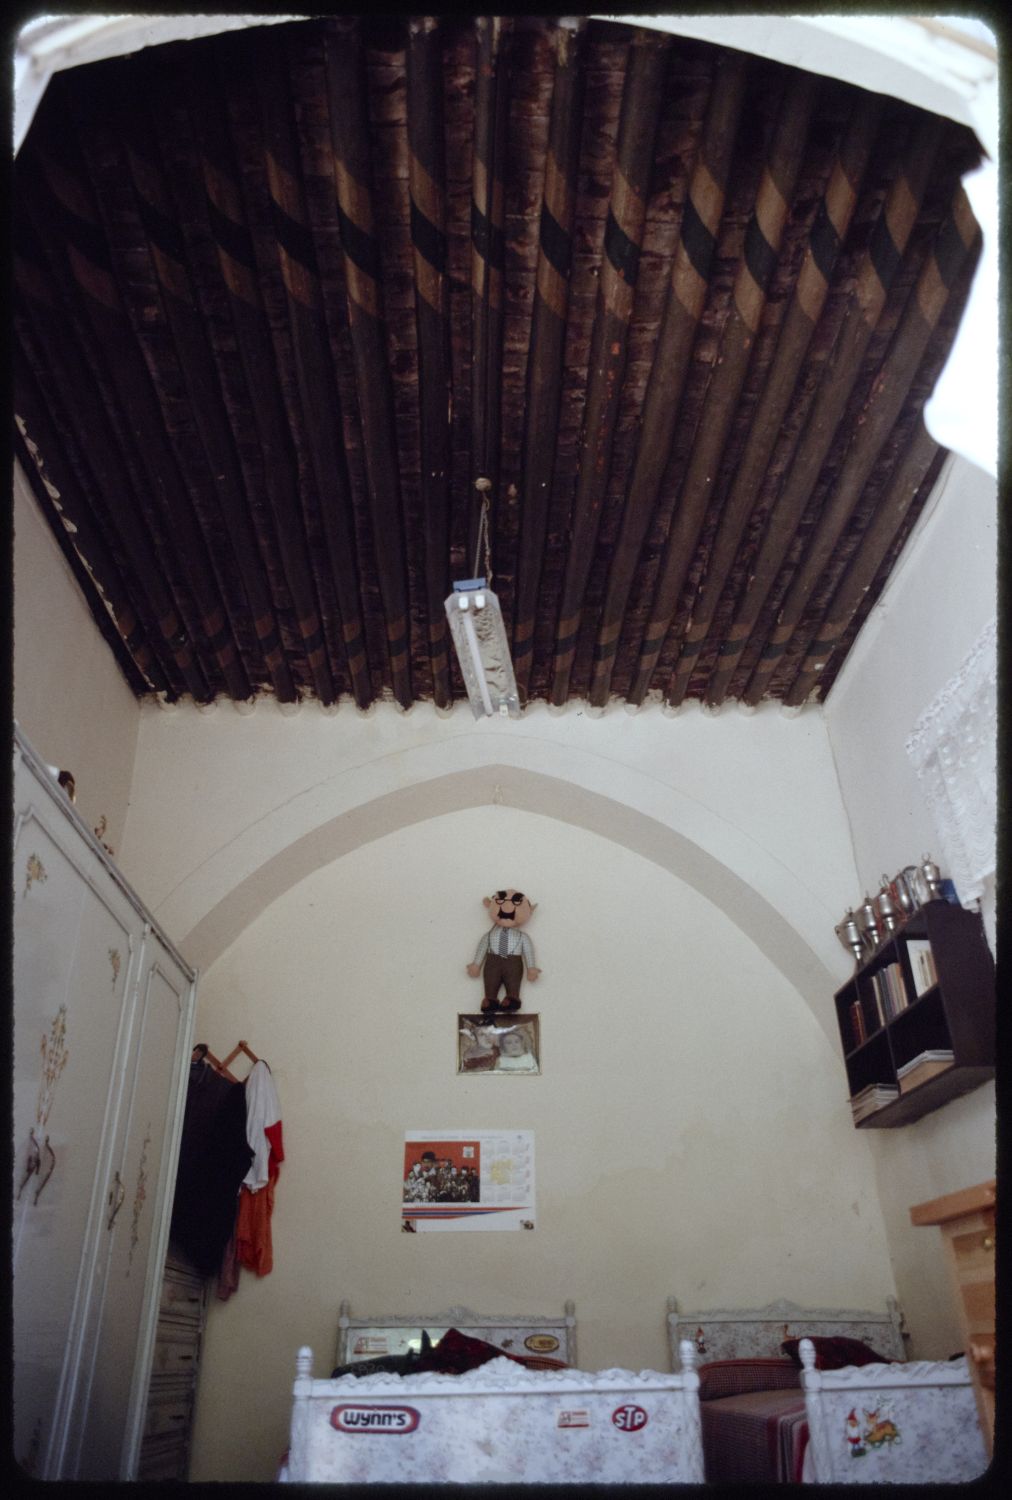 Interior view of ceiling